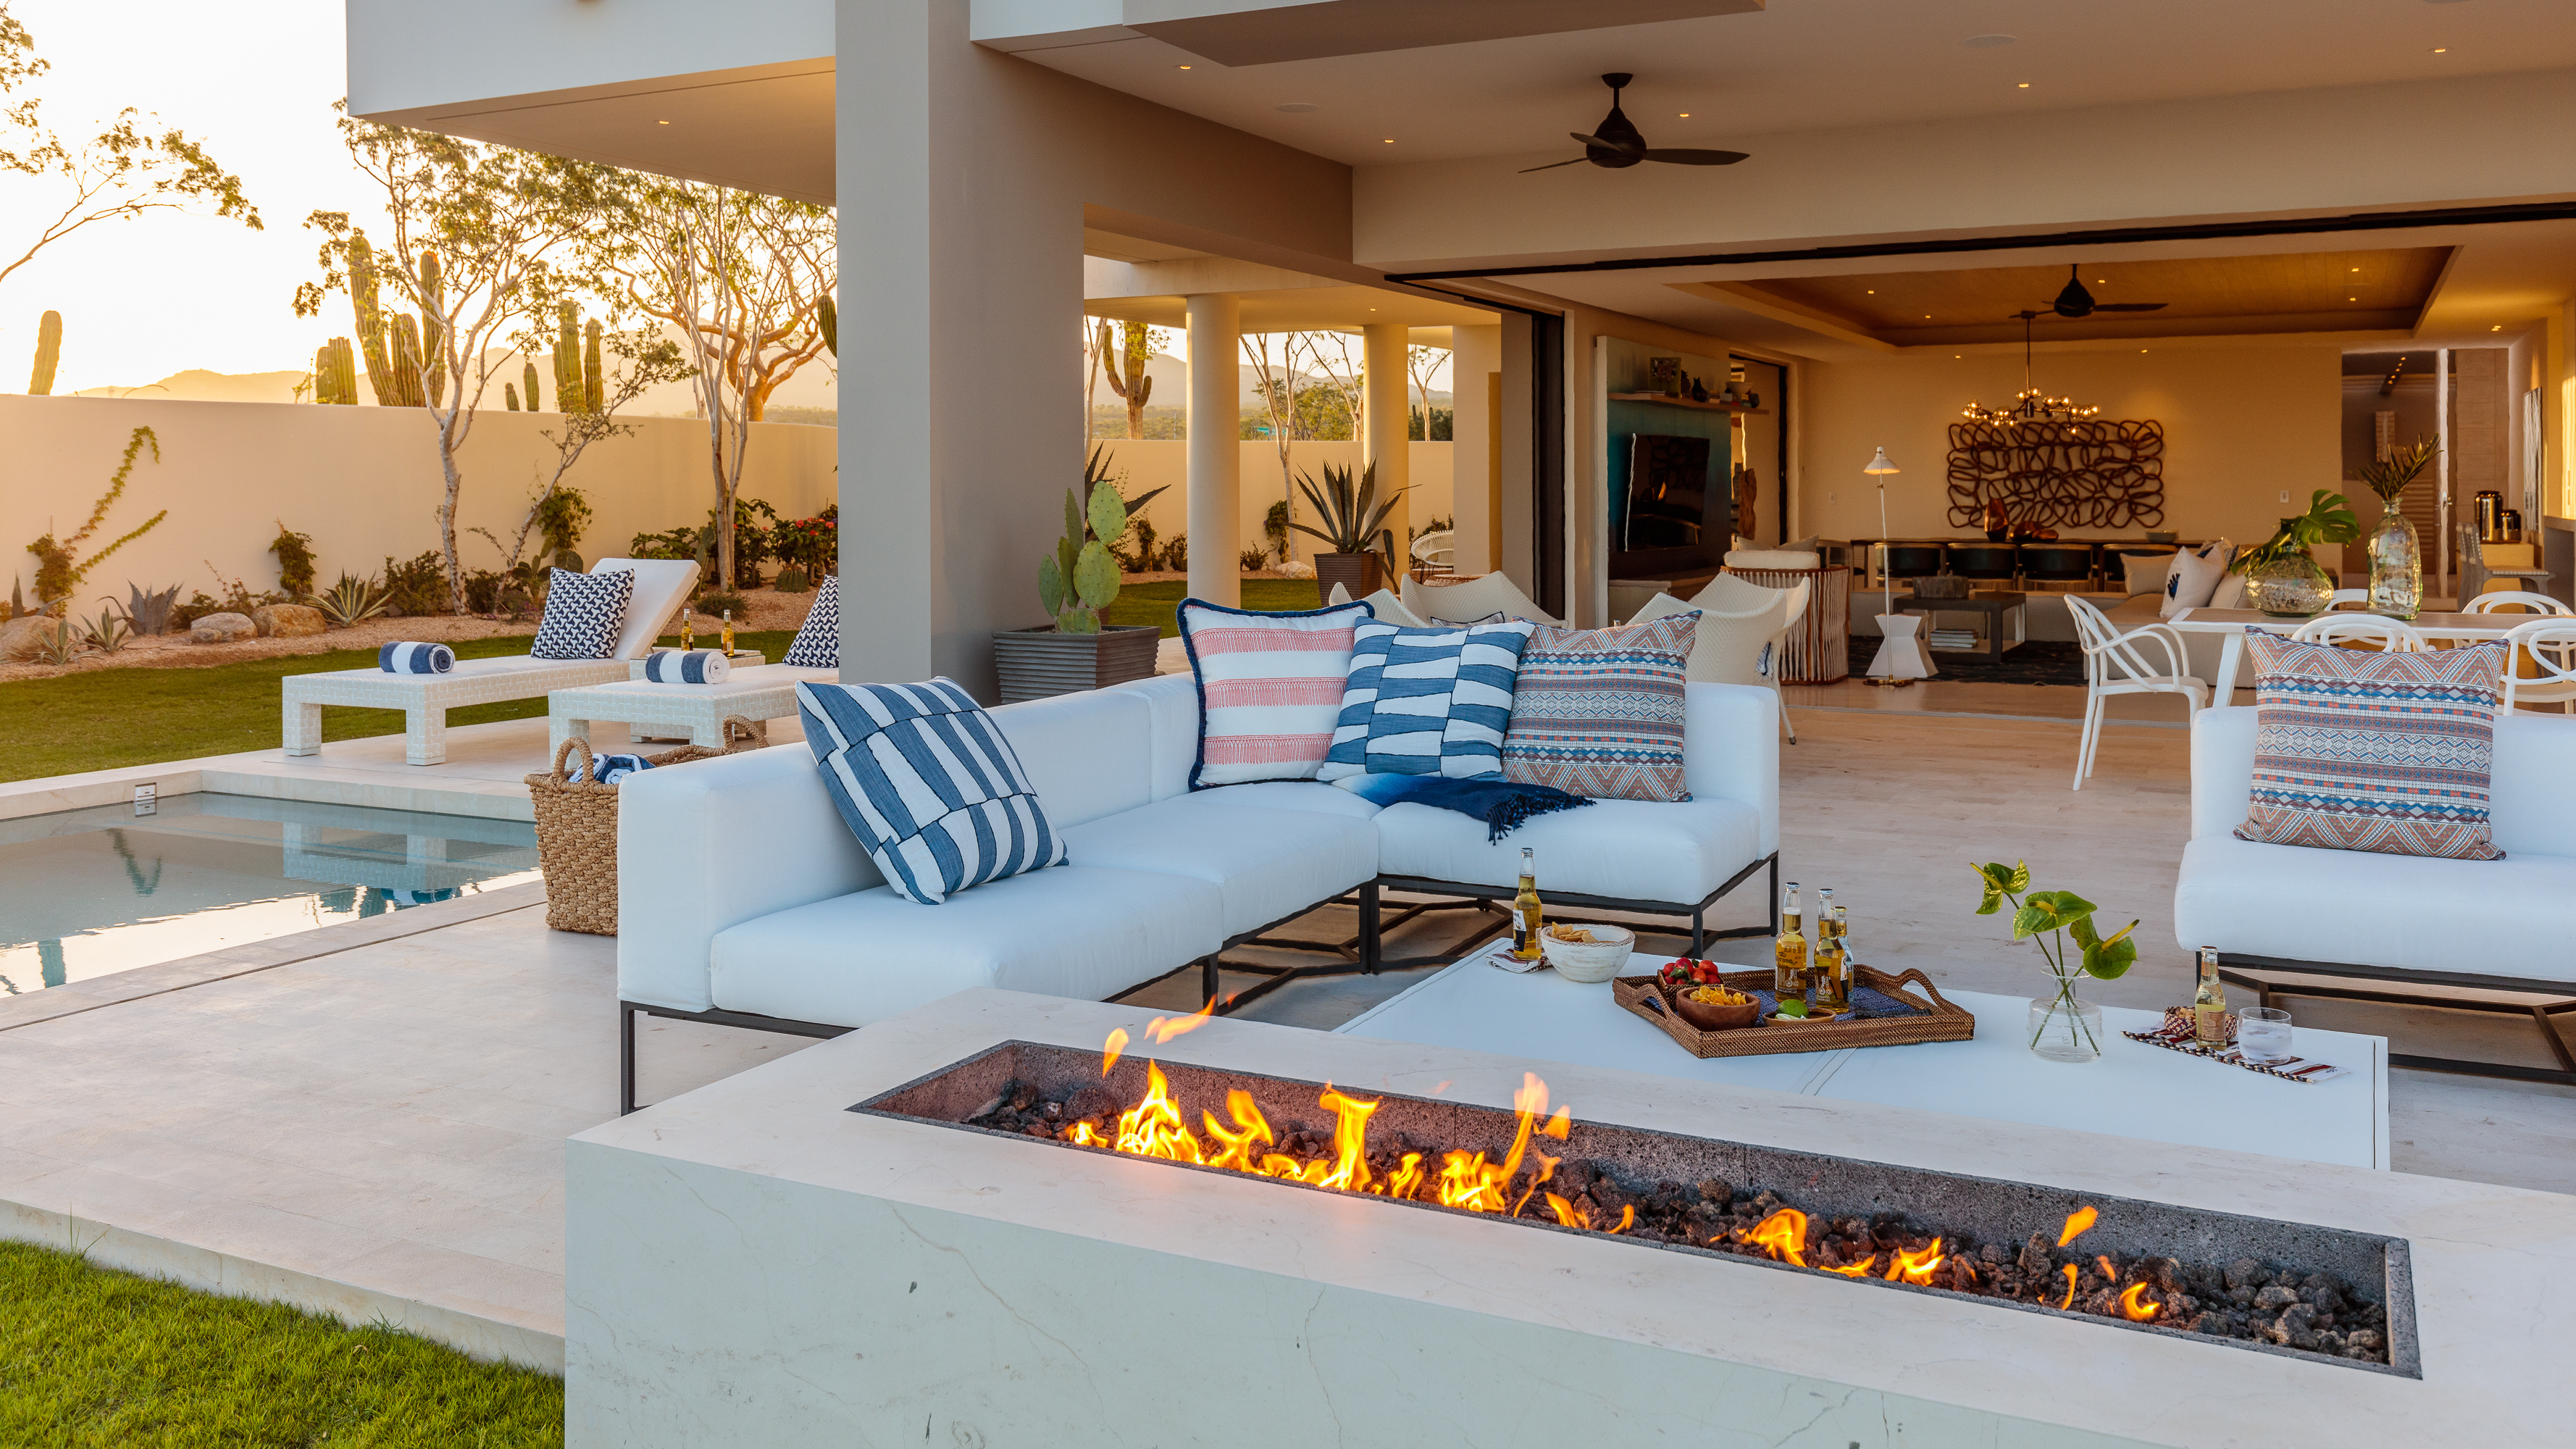 J Banks Design Group envisioned this Maravilla Los Cabos Outdoor Living space with a Fire Pit